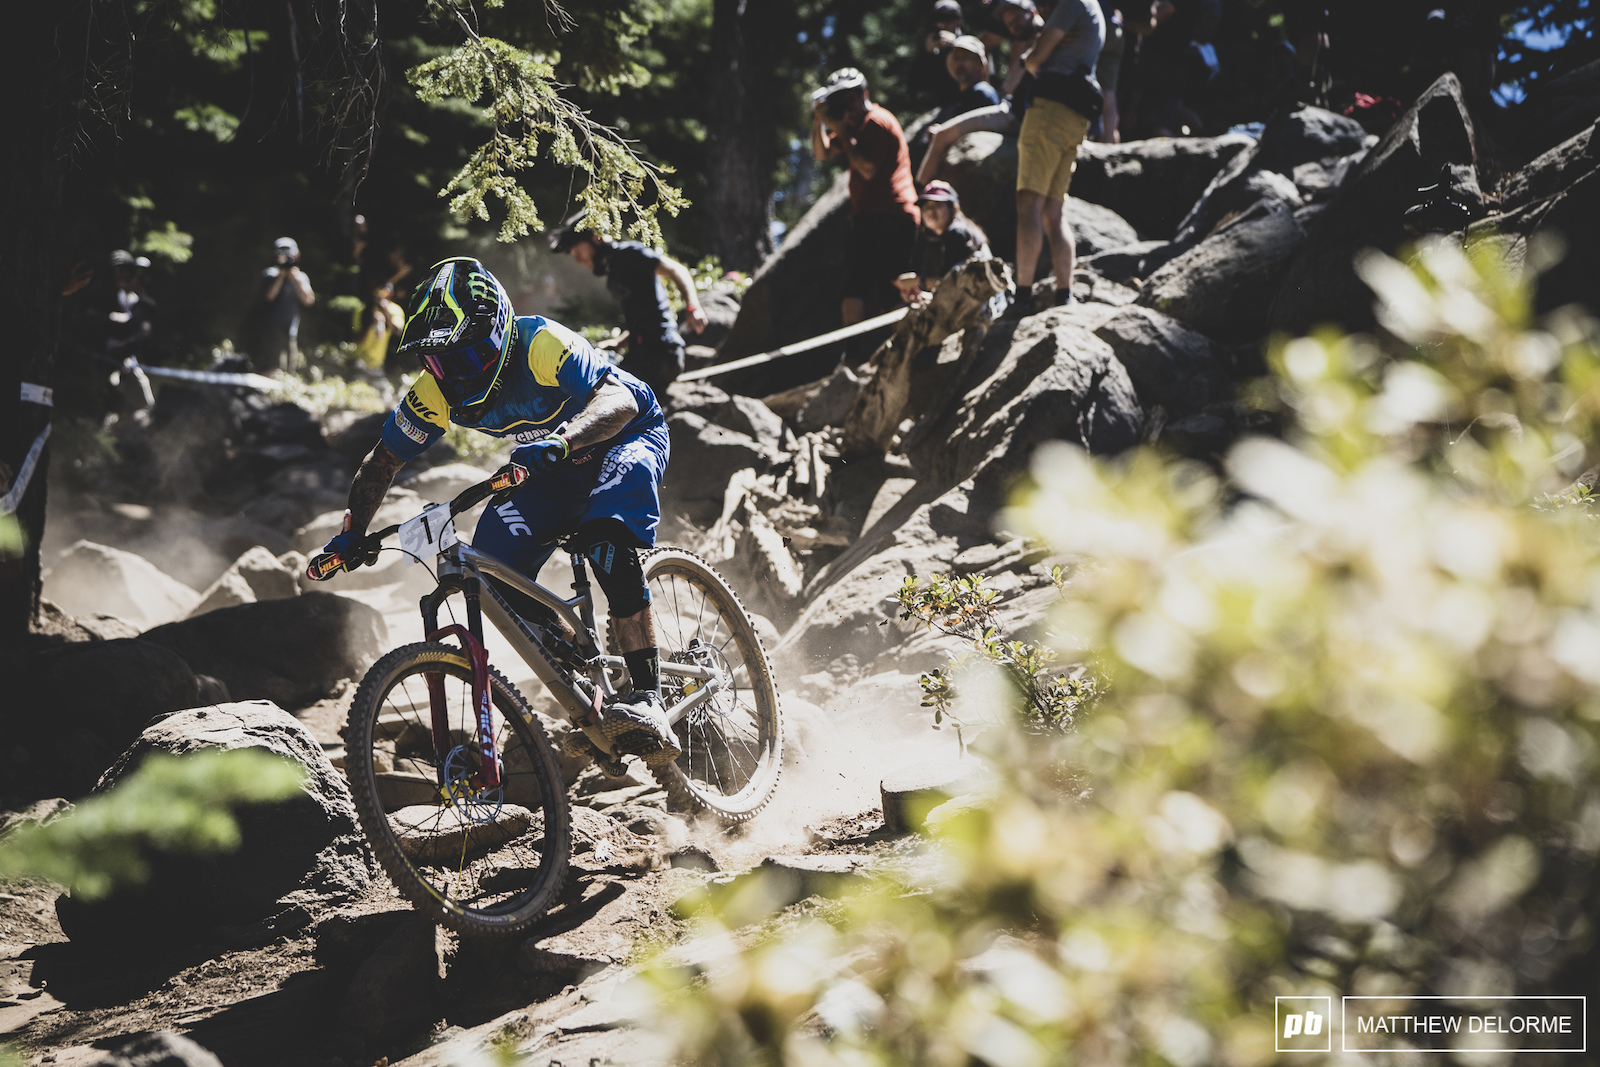 Sam Hill was so close to his first win but would have to settle for second by .8 of a second.